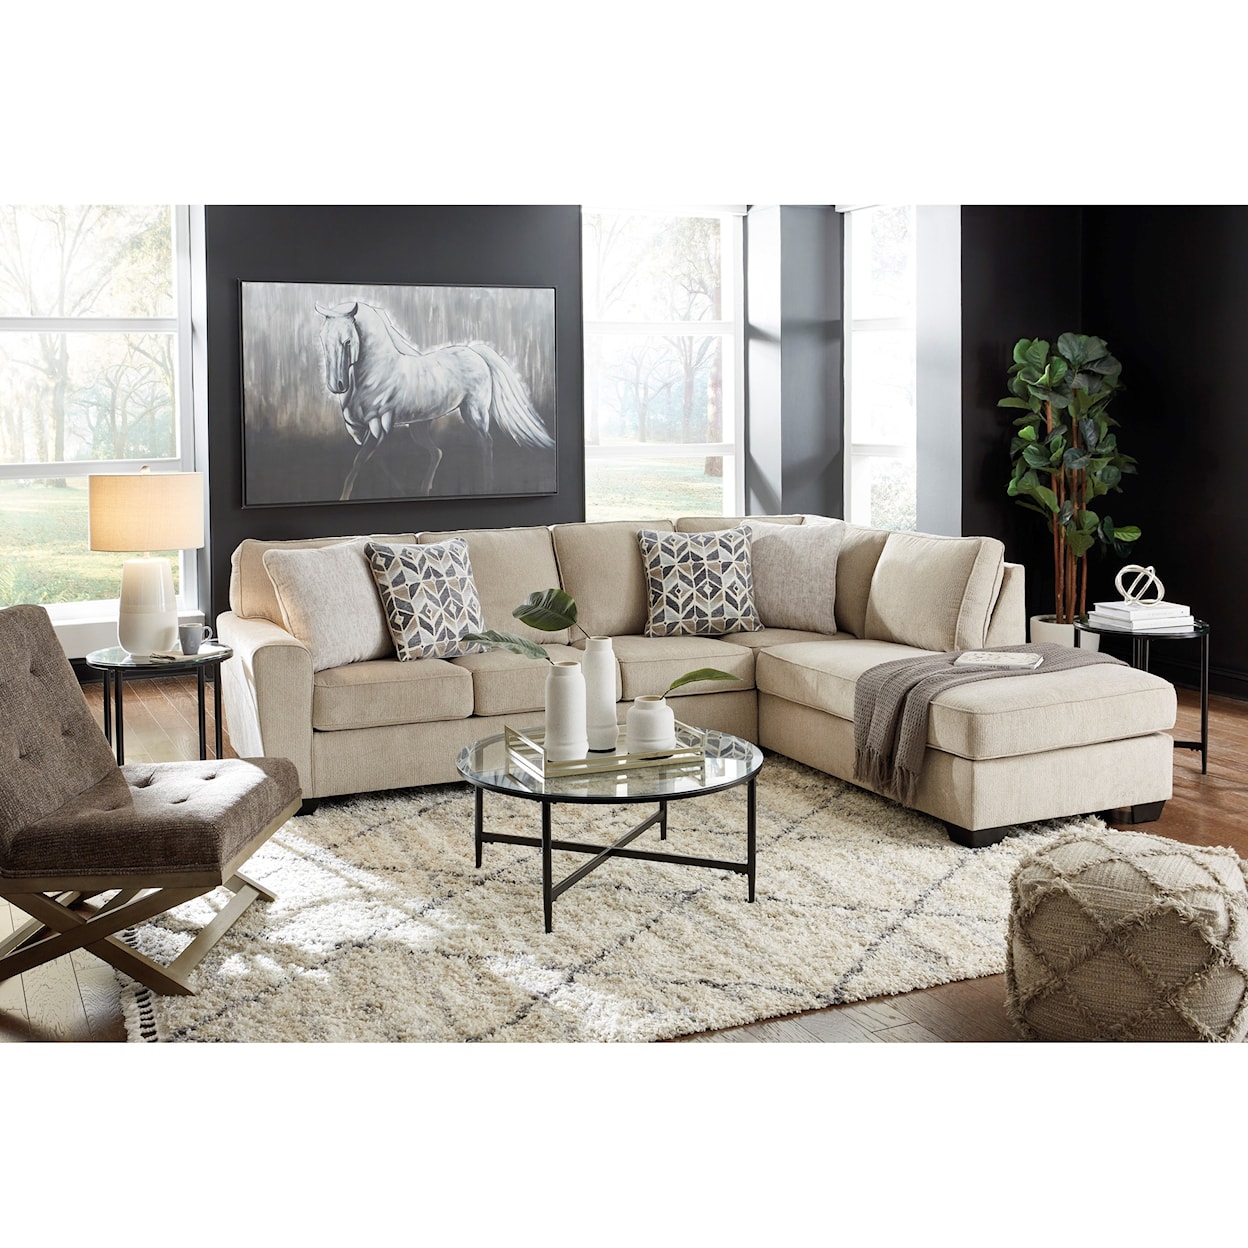 Signature Design by Ashley Decelle 2-Piece Sectional with Chaise